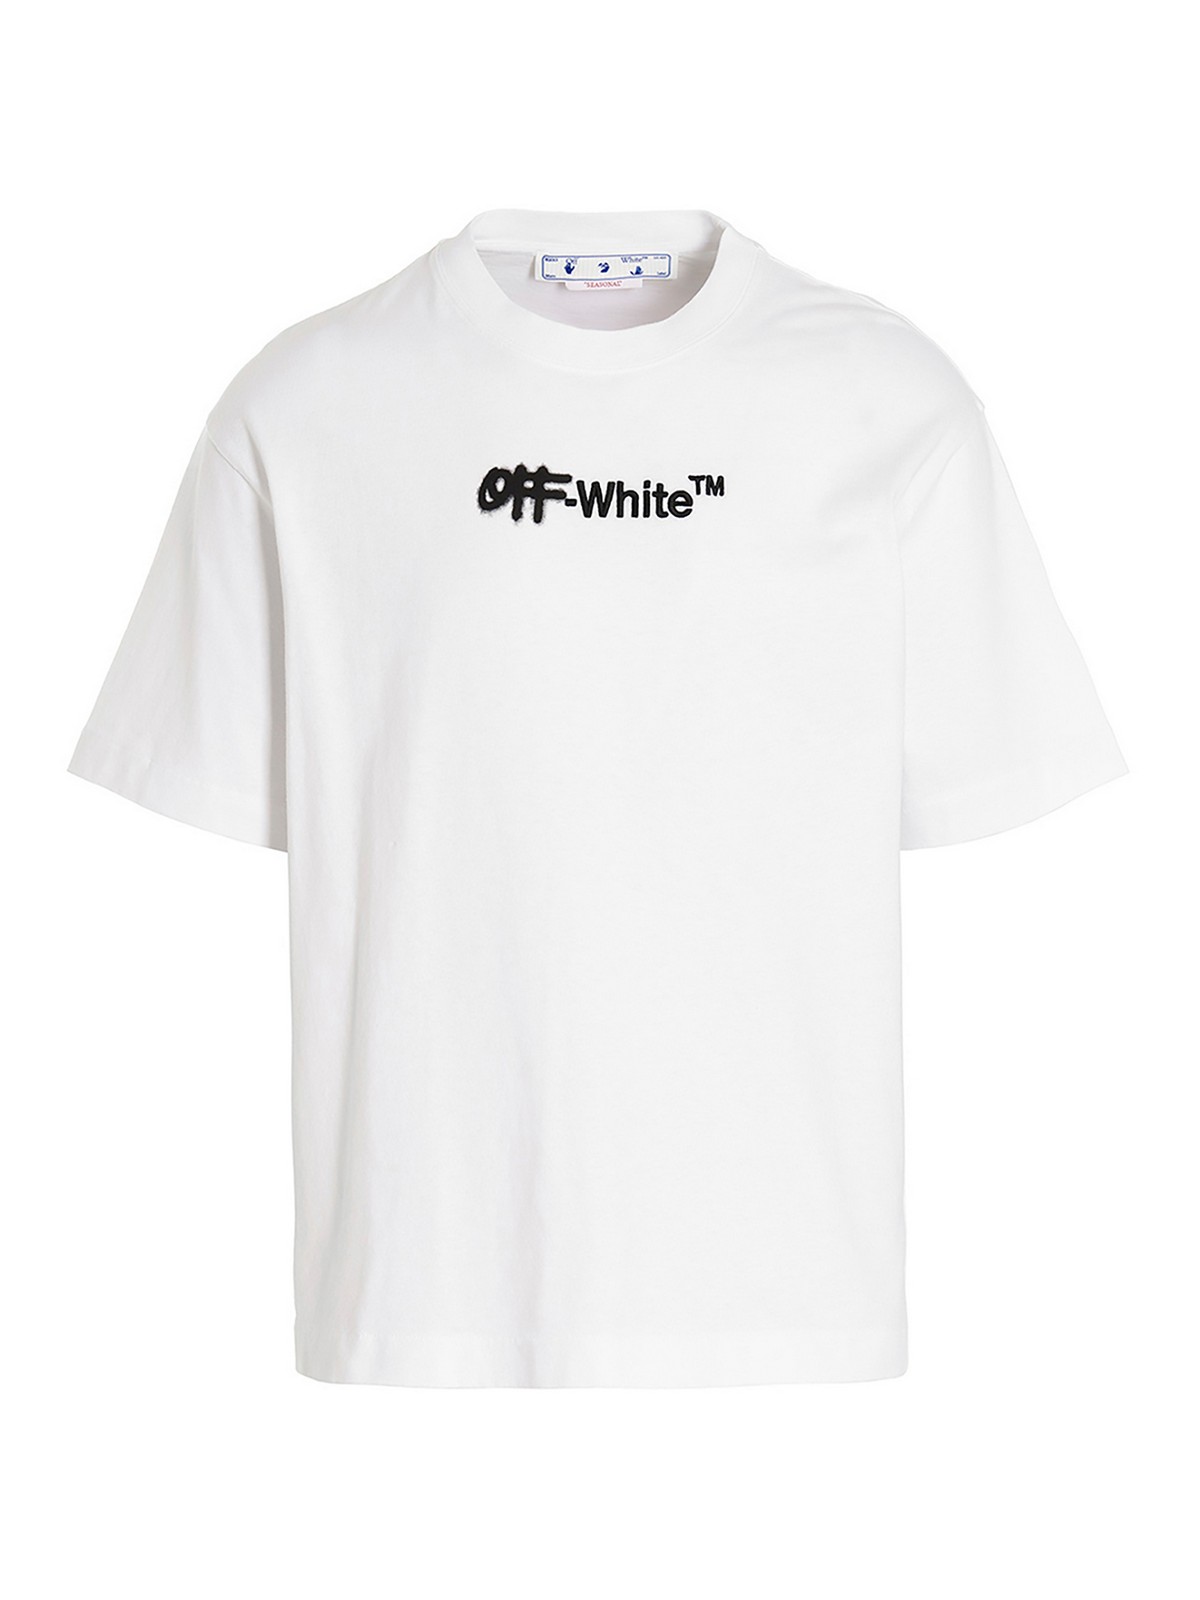 - helvetica - T-shirts Off-White t-shirt OMAA120F22JER0020110 Spray